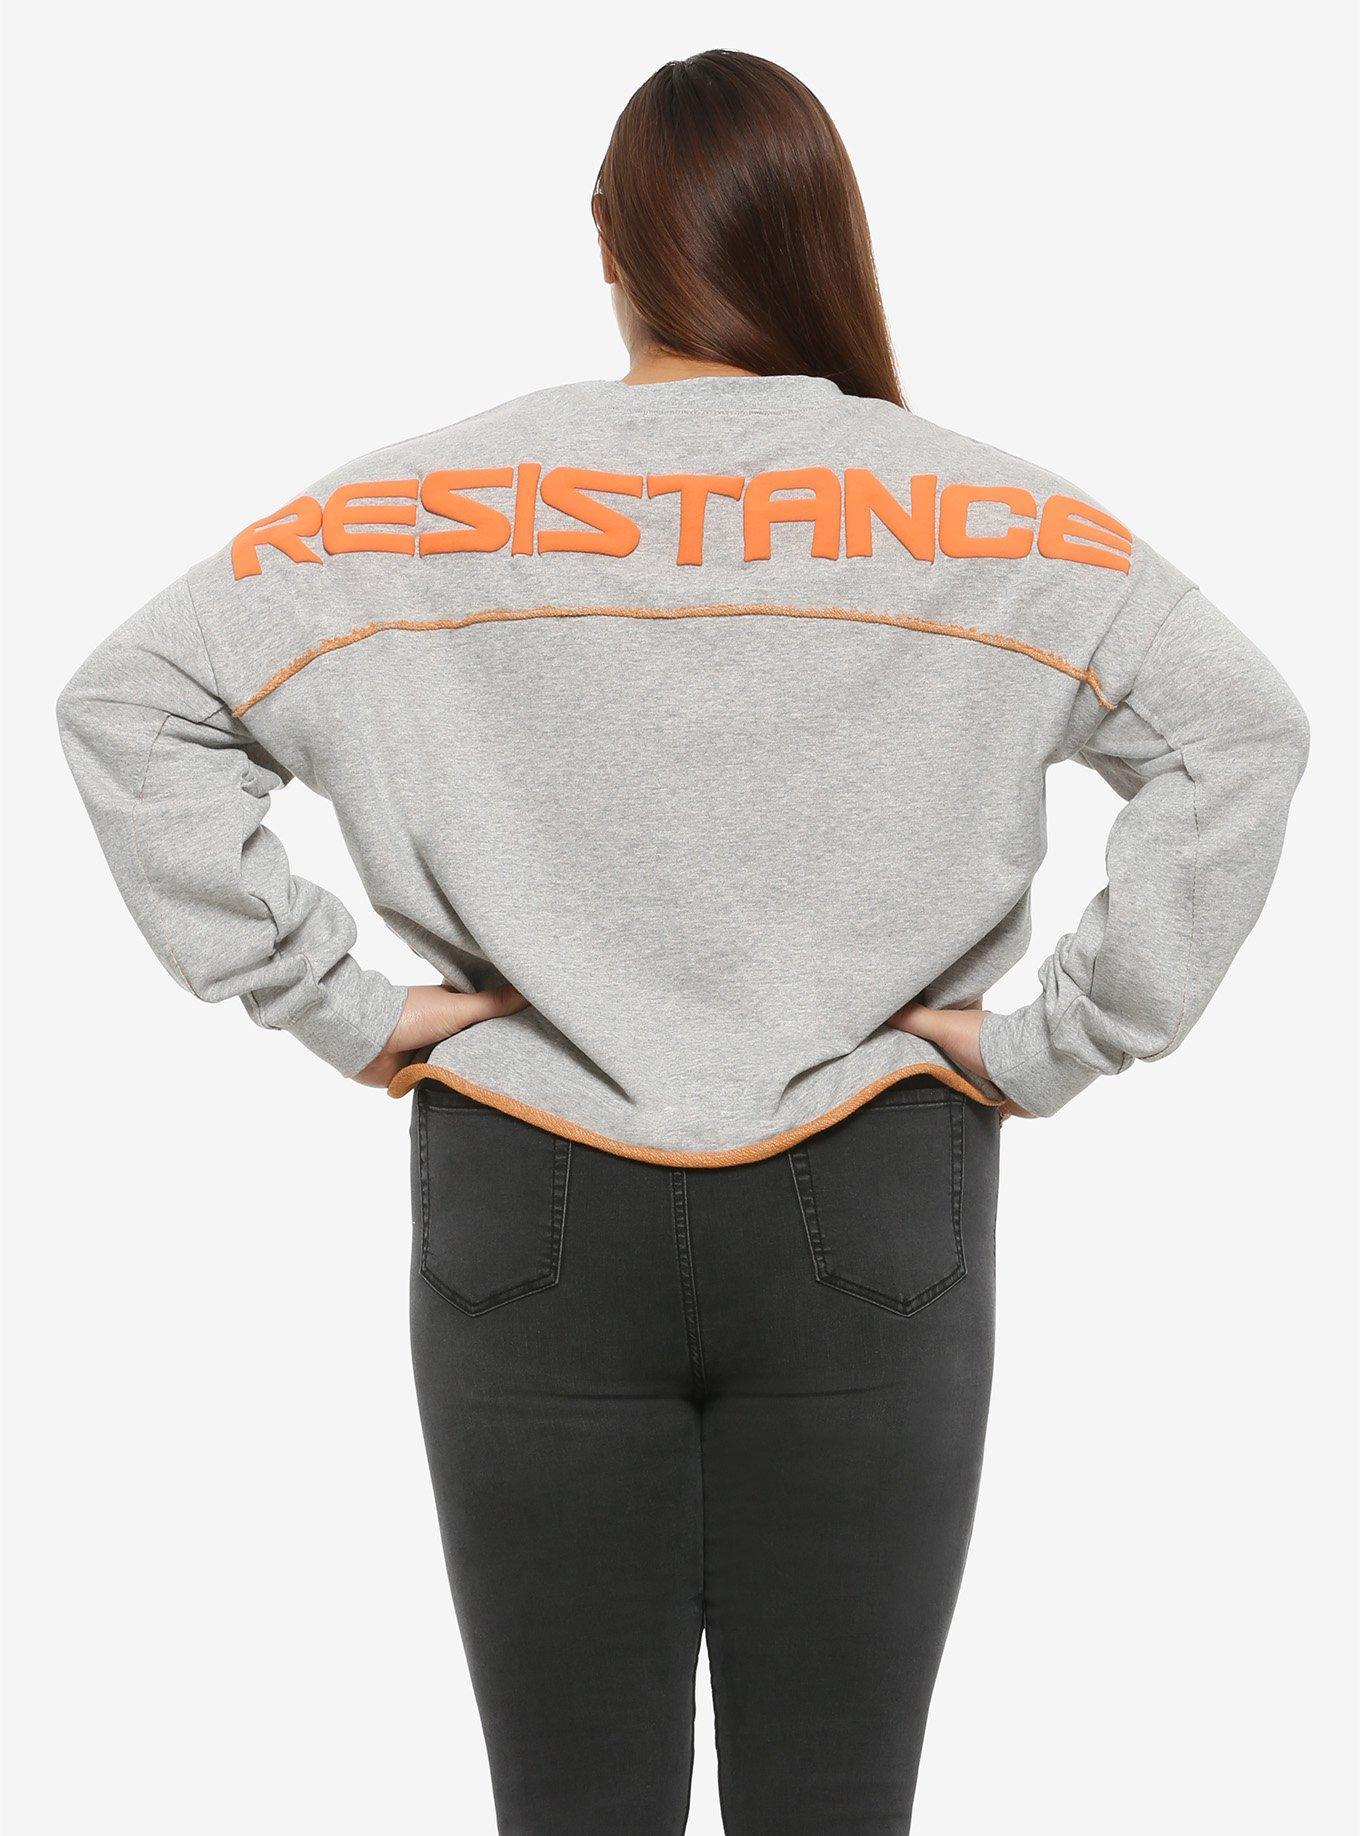 Her Universe Star Wars: The Rise Of Skywalker Resistance Raw-Edge Girls Athletic Jersey Plus Size, ORANGE, hi-res